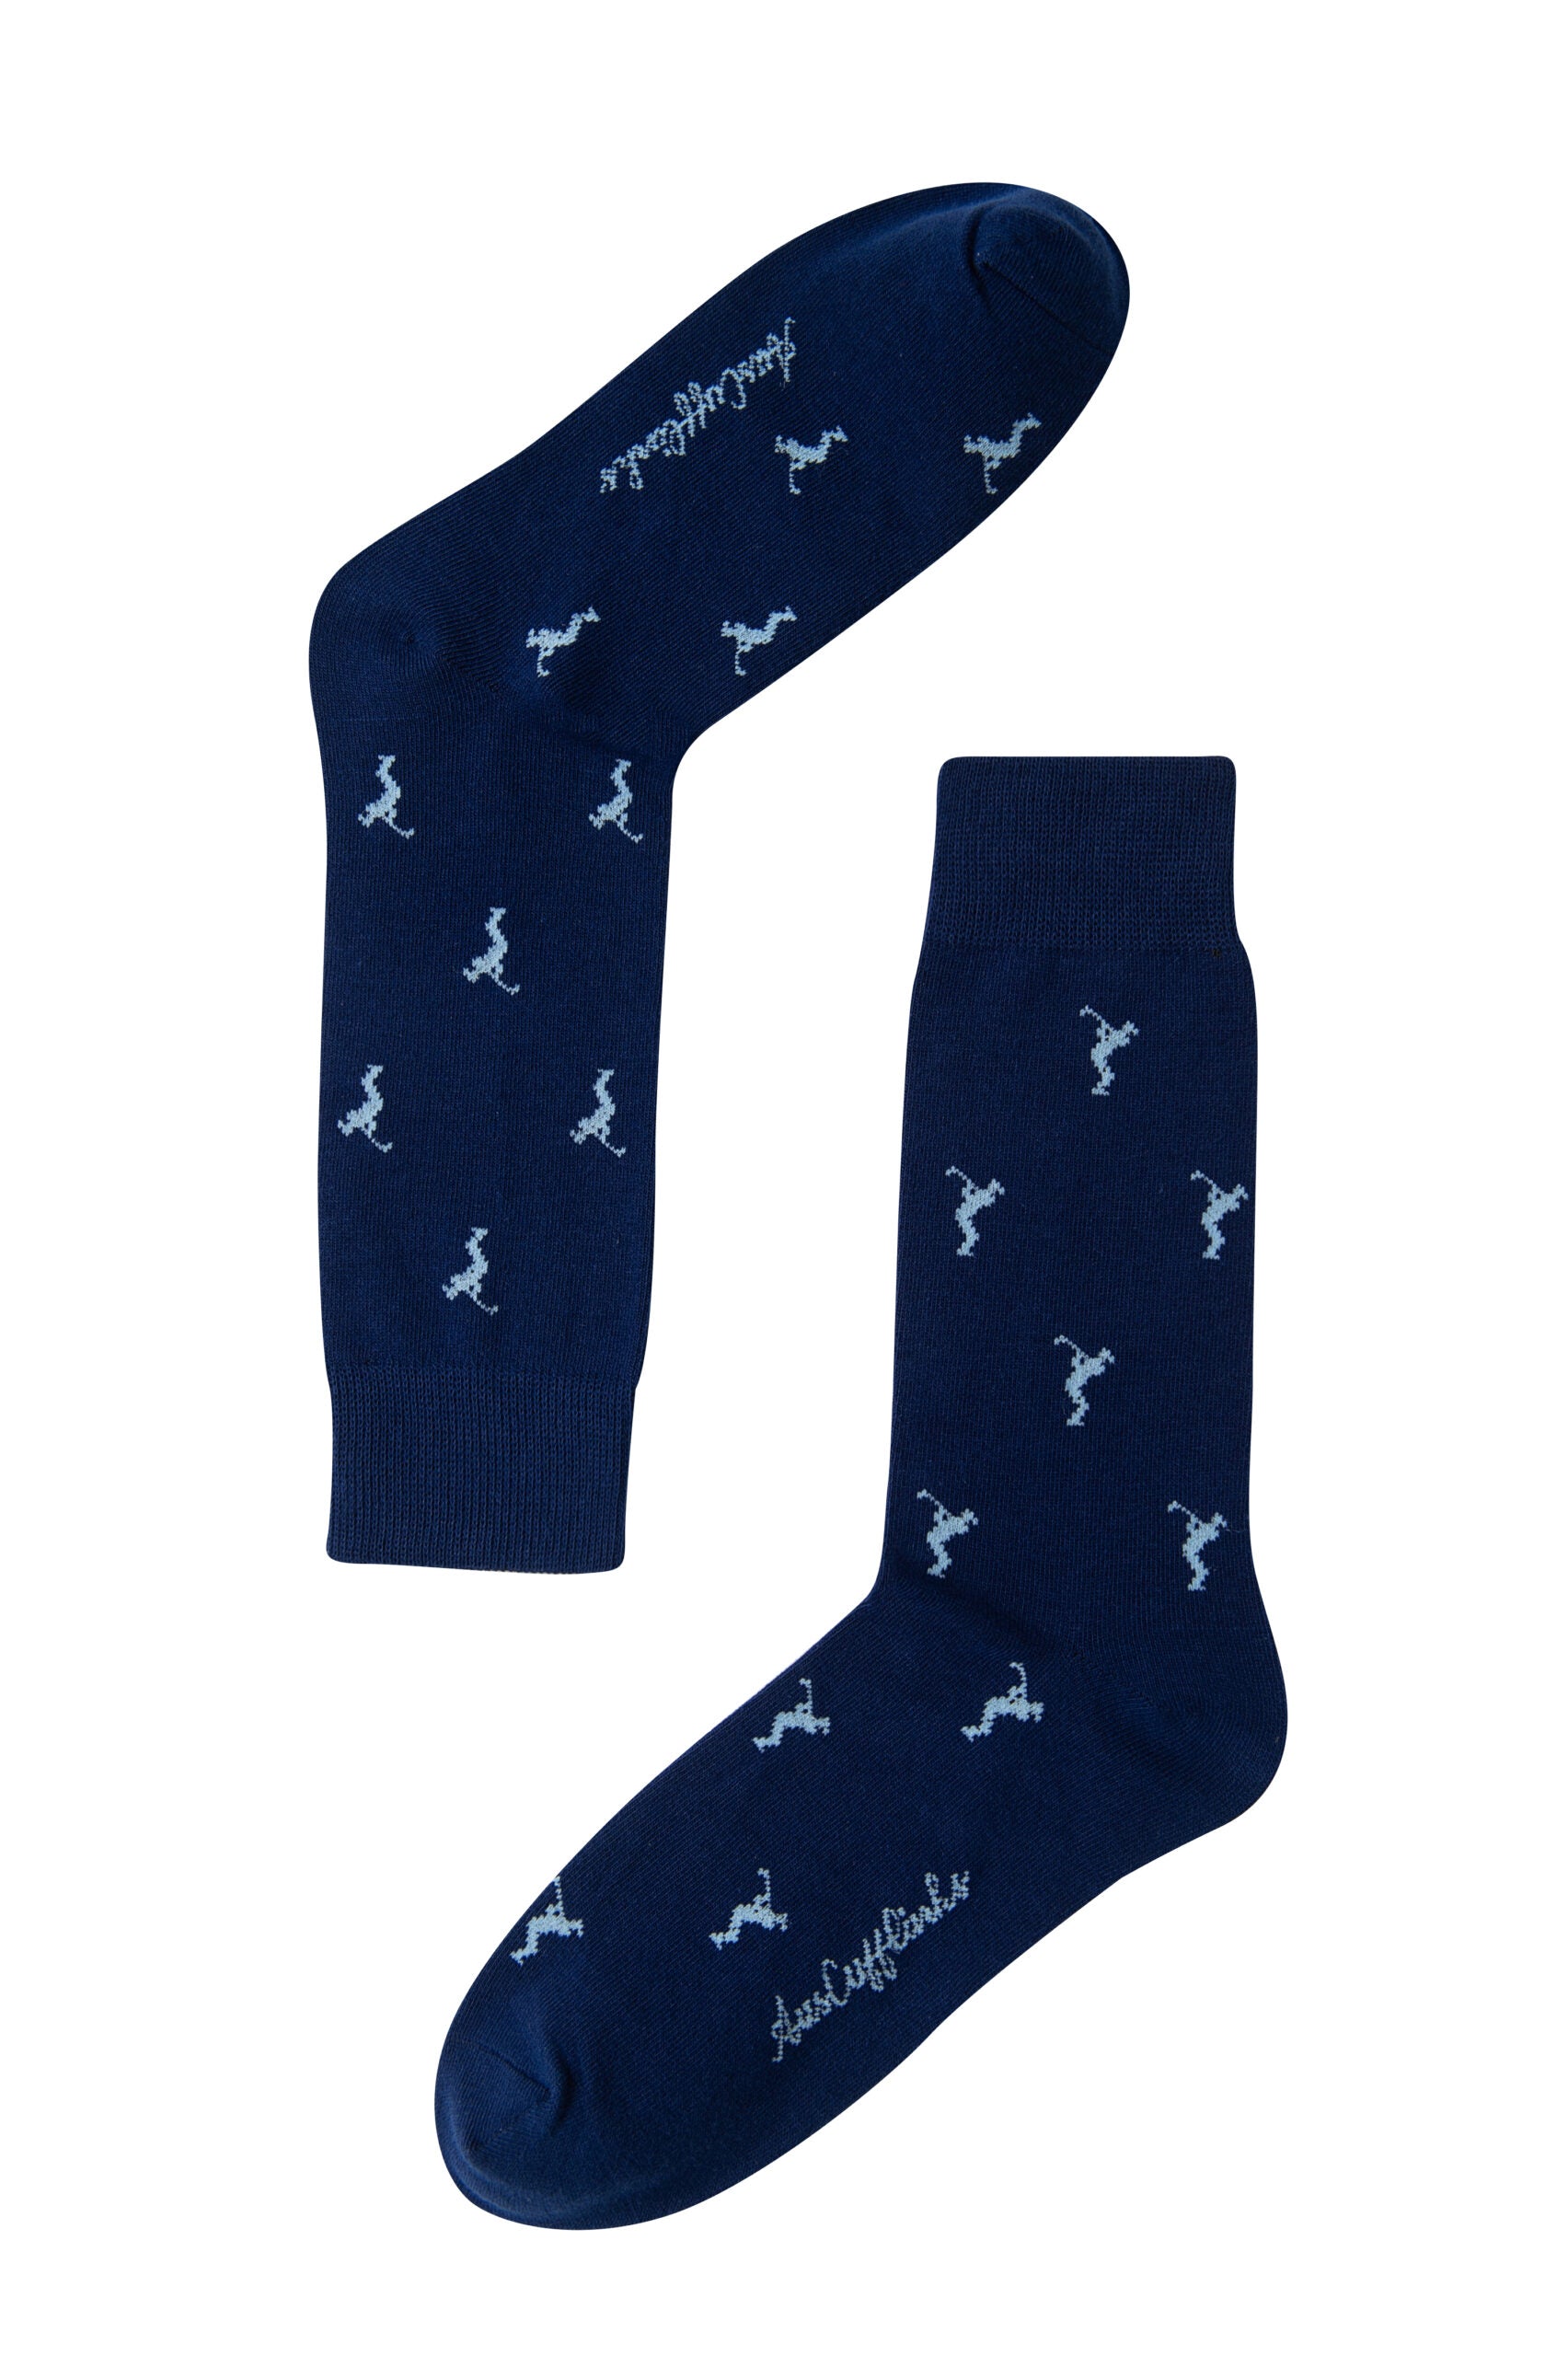 A pair of Golf Swing Blue Socks with white birds on them.